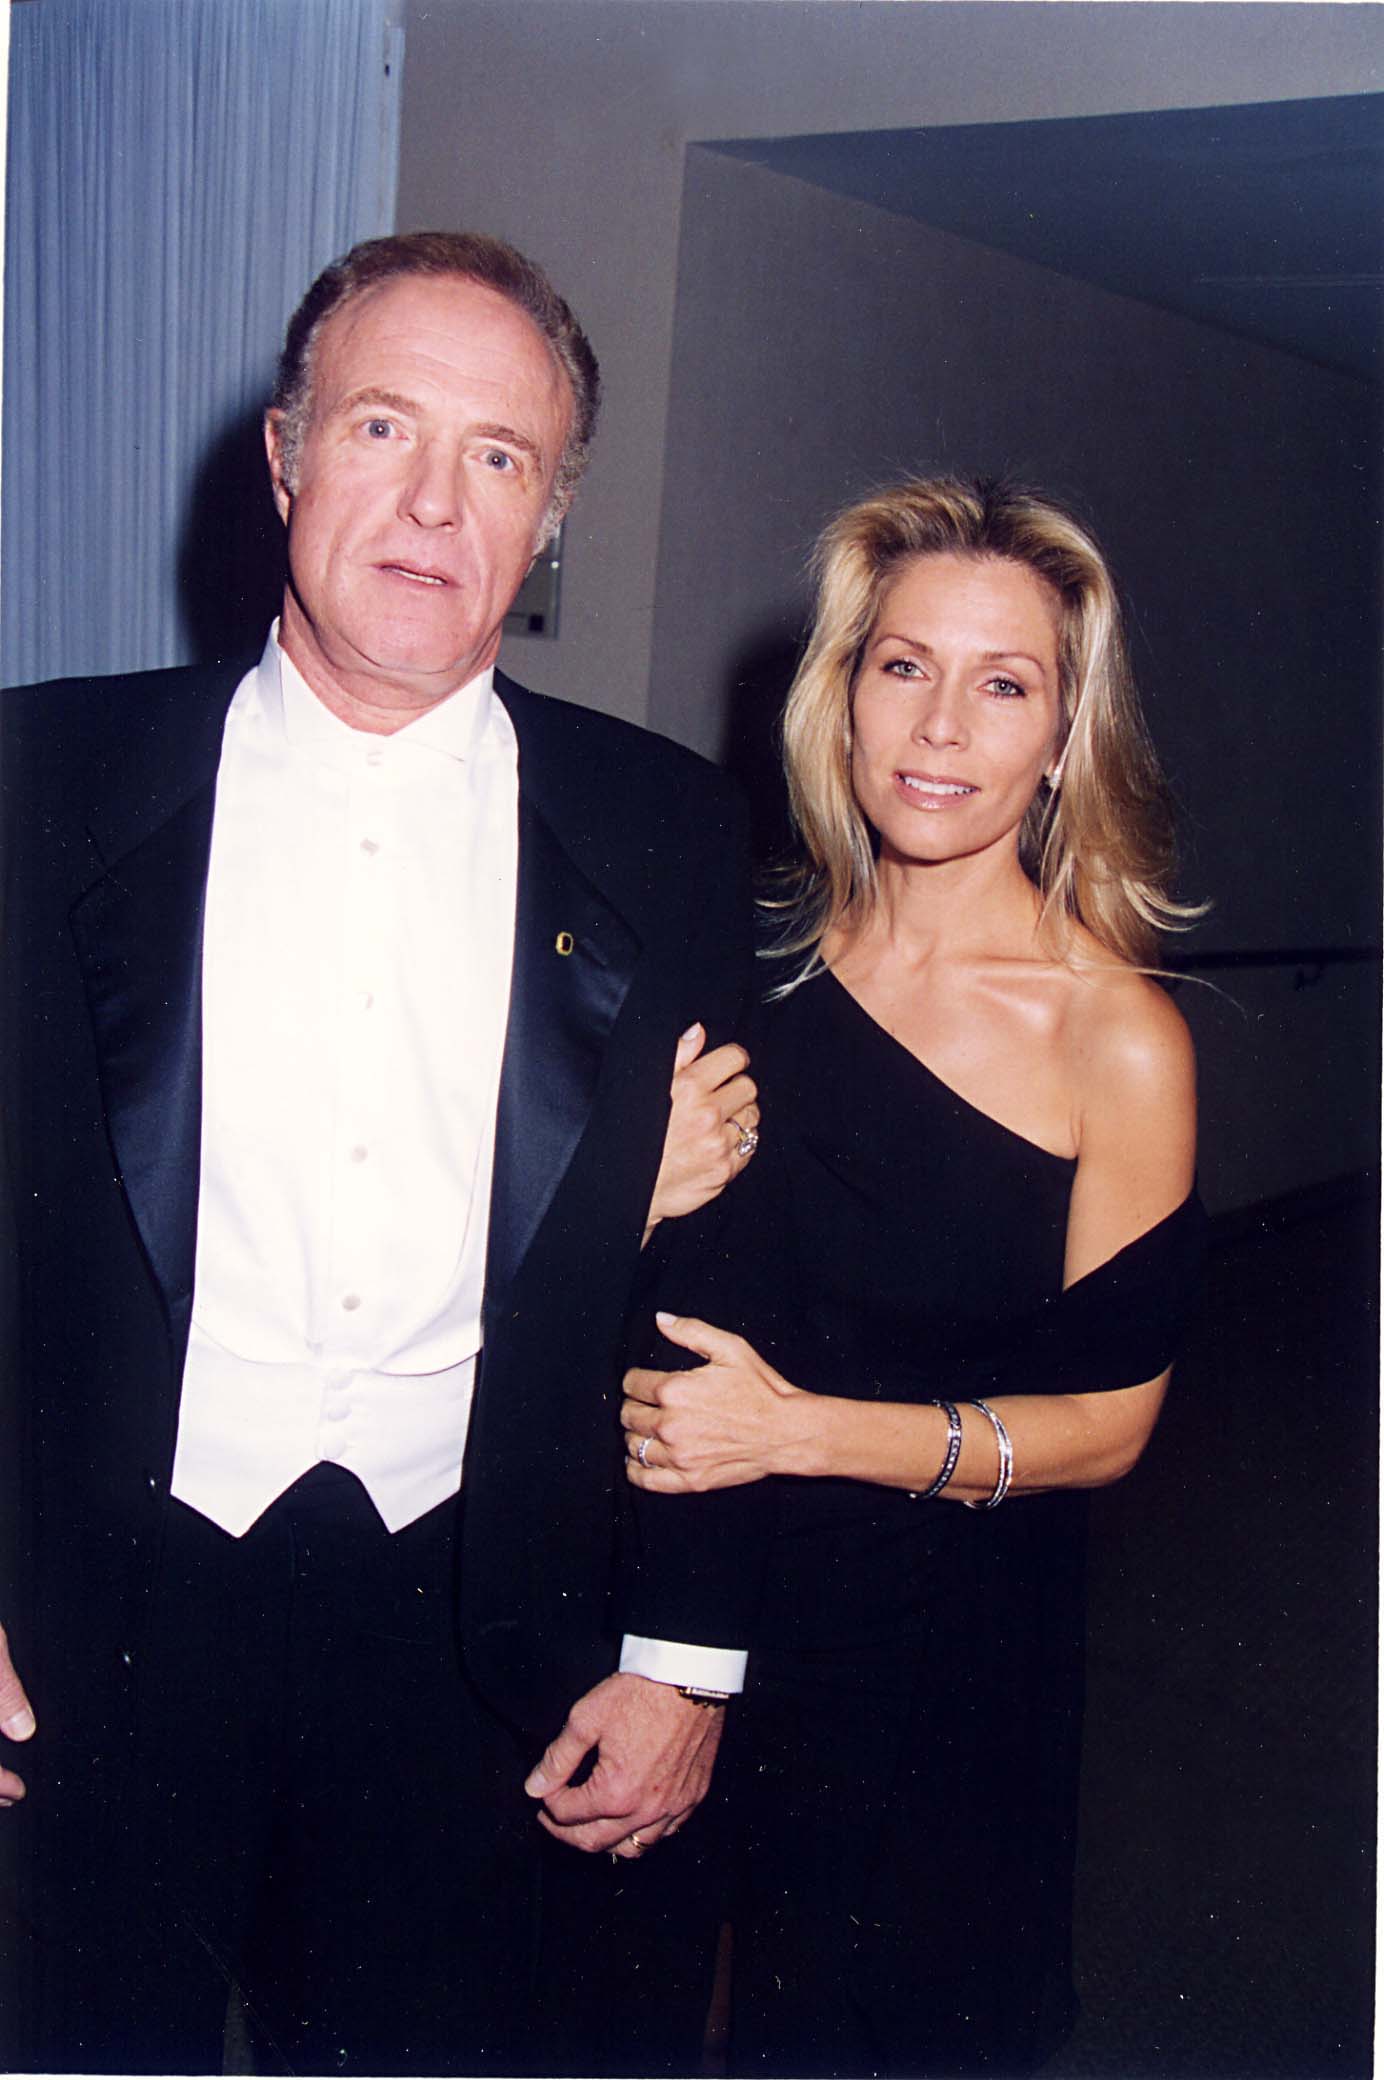 James Caan and his wife Linda Stokes during 1996 Carousel of Hope in Los Angeles, California. / Source: Getty Images